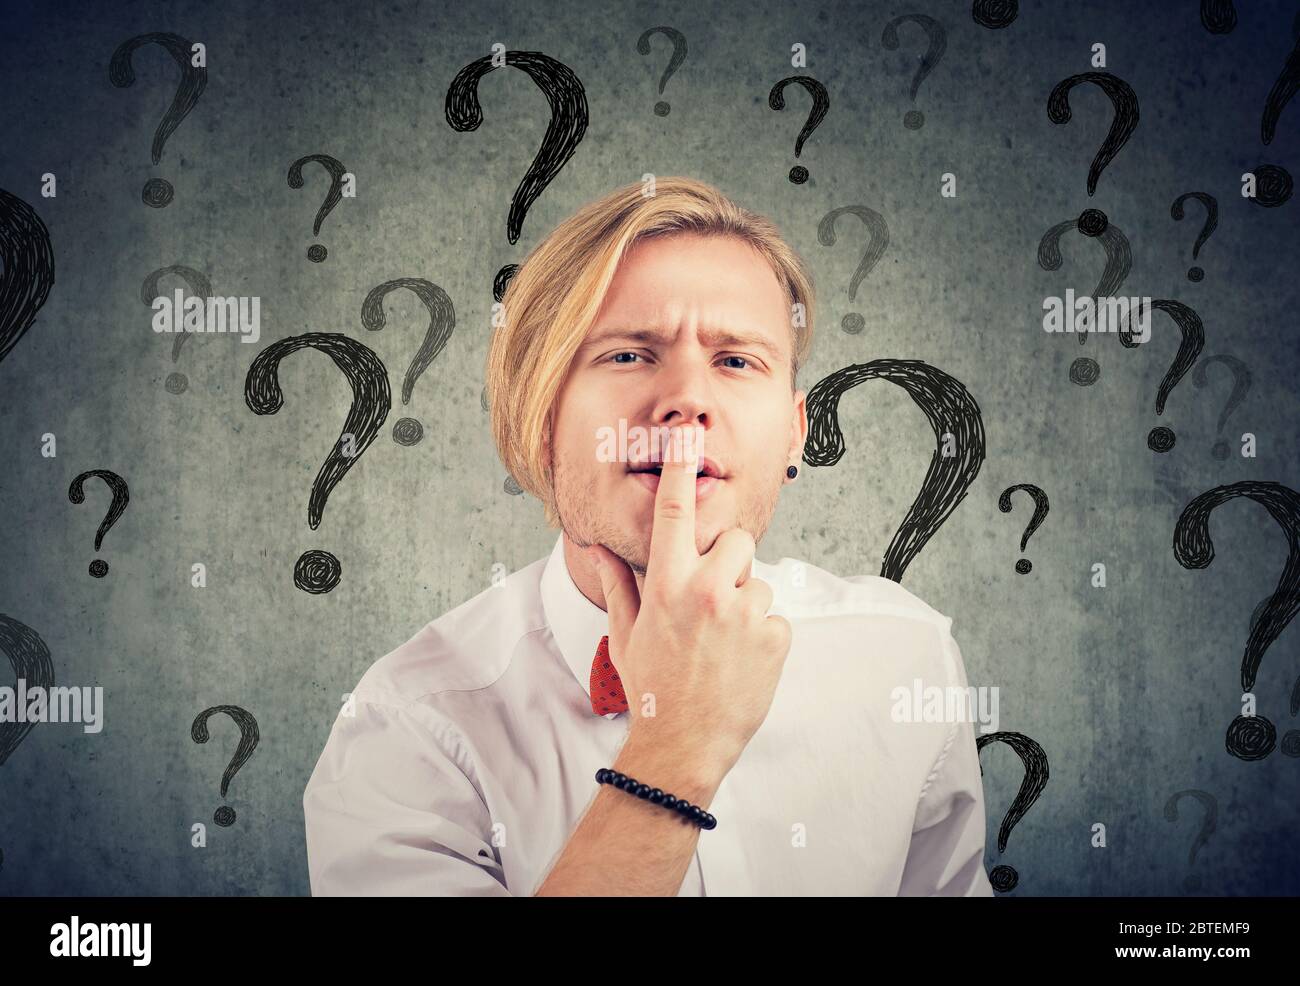 Confused young man with too many questions and no answer Stock Photo